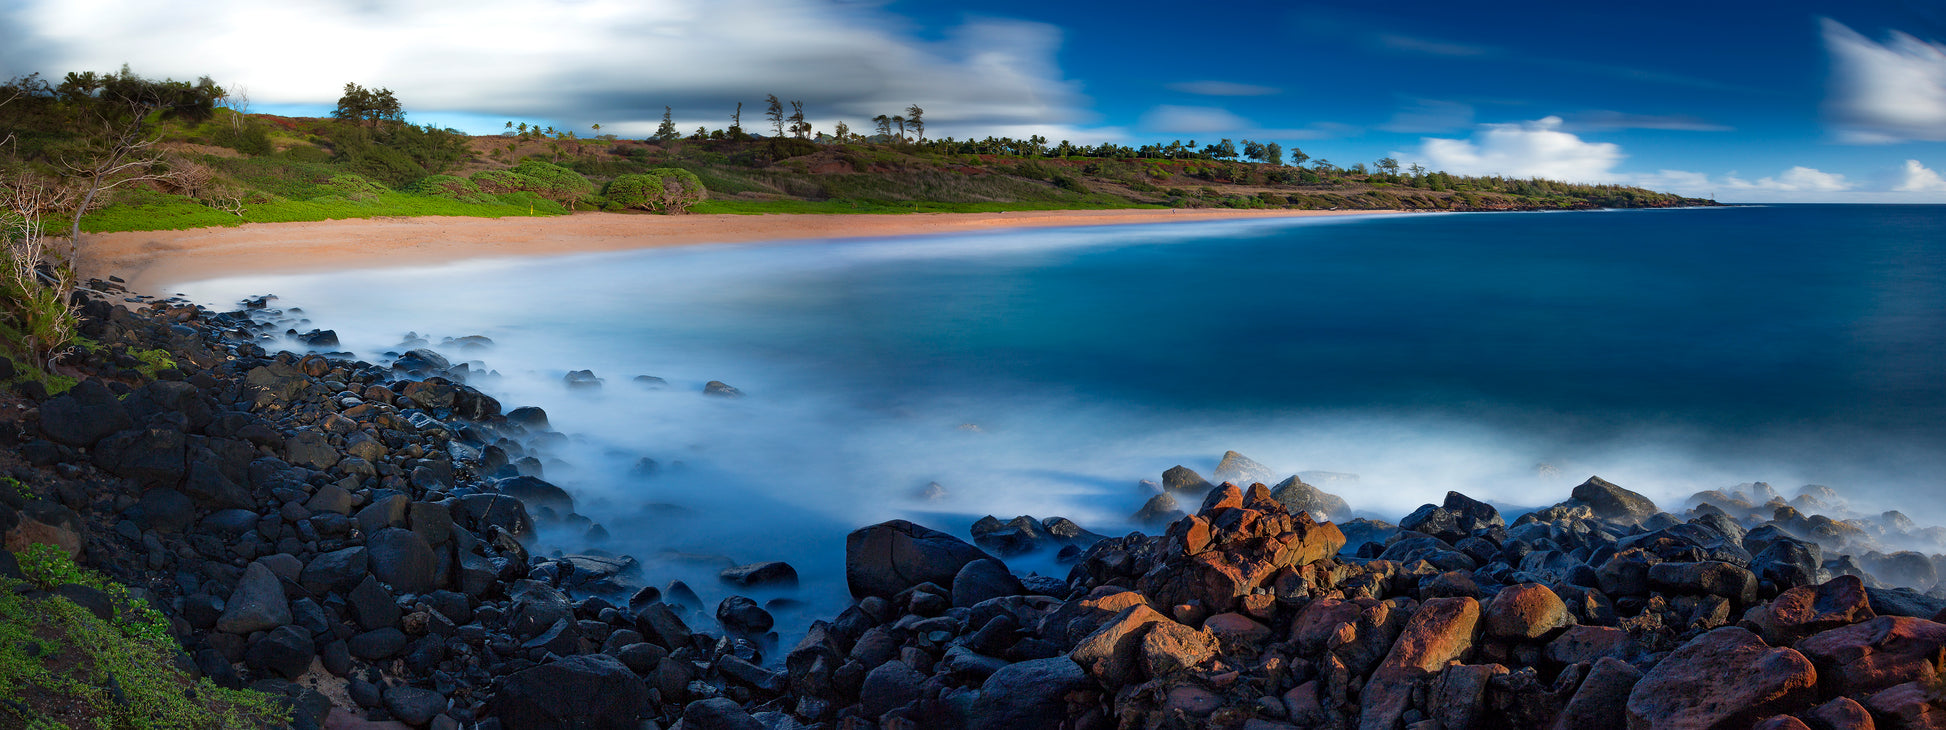 Fine art photograph of Donkey Beach on Kauai, by Inspiring Images Hawaii. This scenic landscape photograph shows the beach in the background with a smooth deep blue ocean in the foreground. 